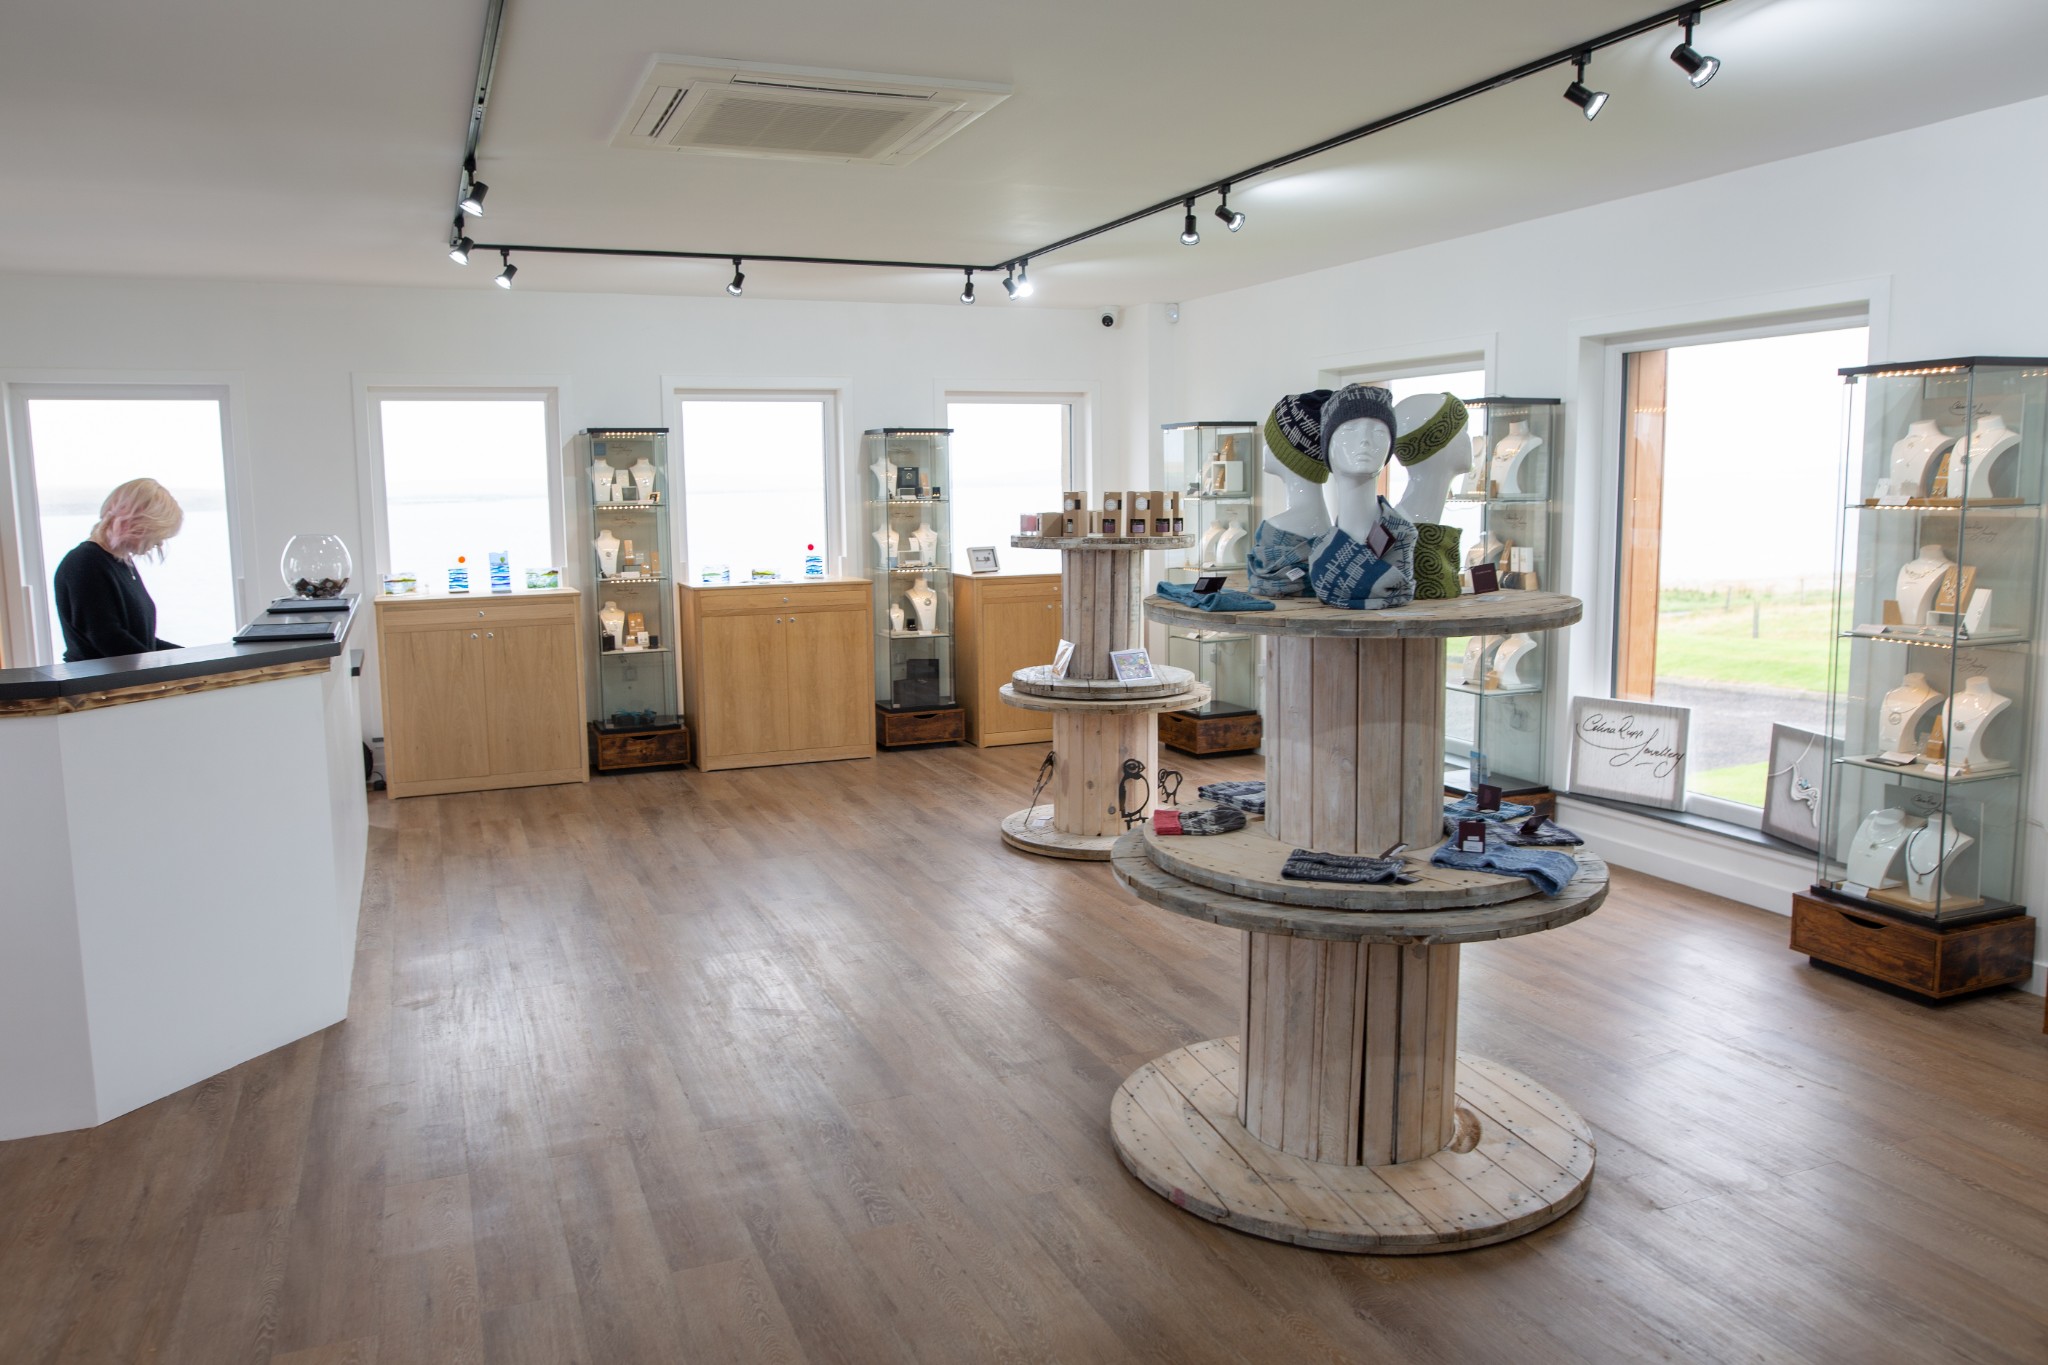 The gallery space at Celina Rupp Jewellery